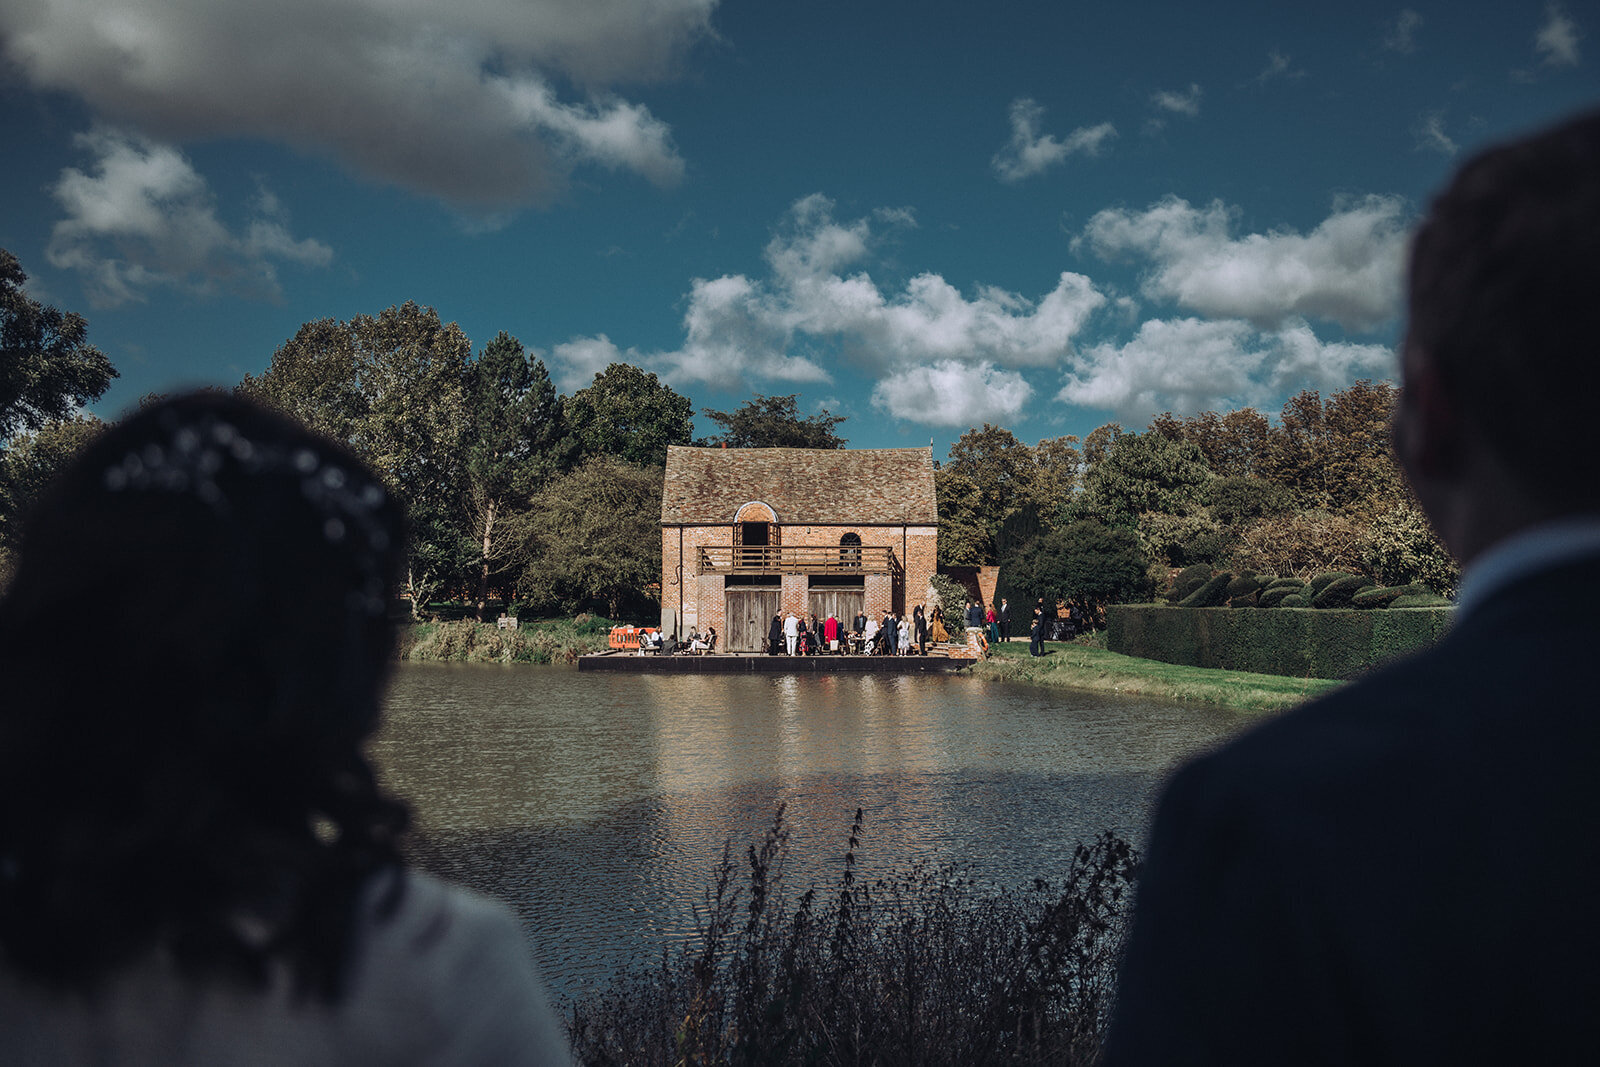 Bride and groom observing their friends and family from across a pond at their wedding at Childerley